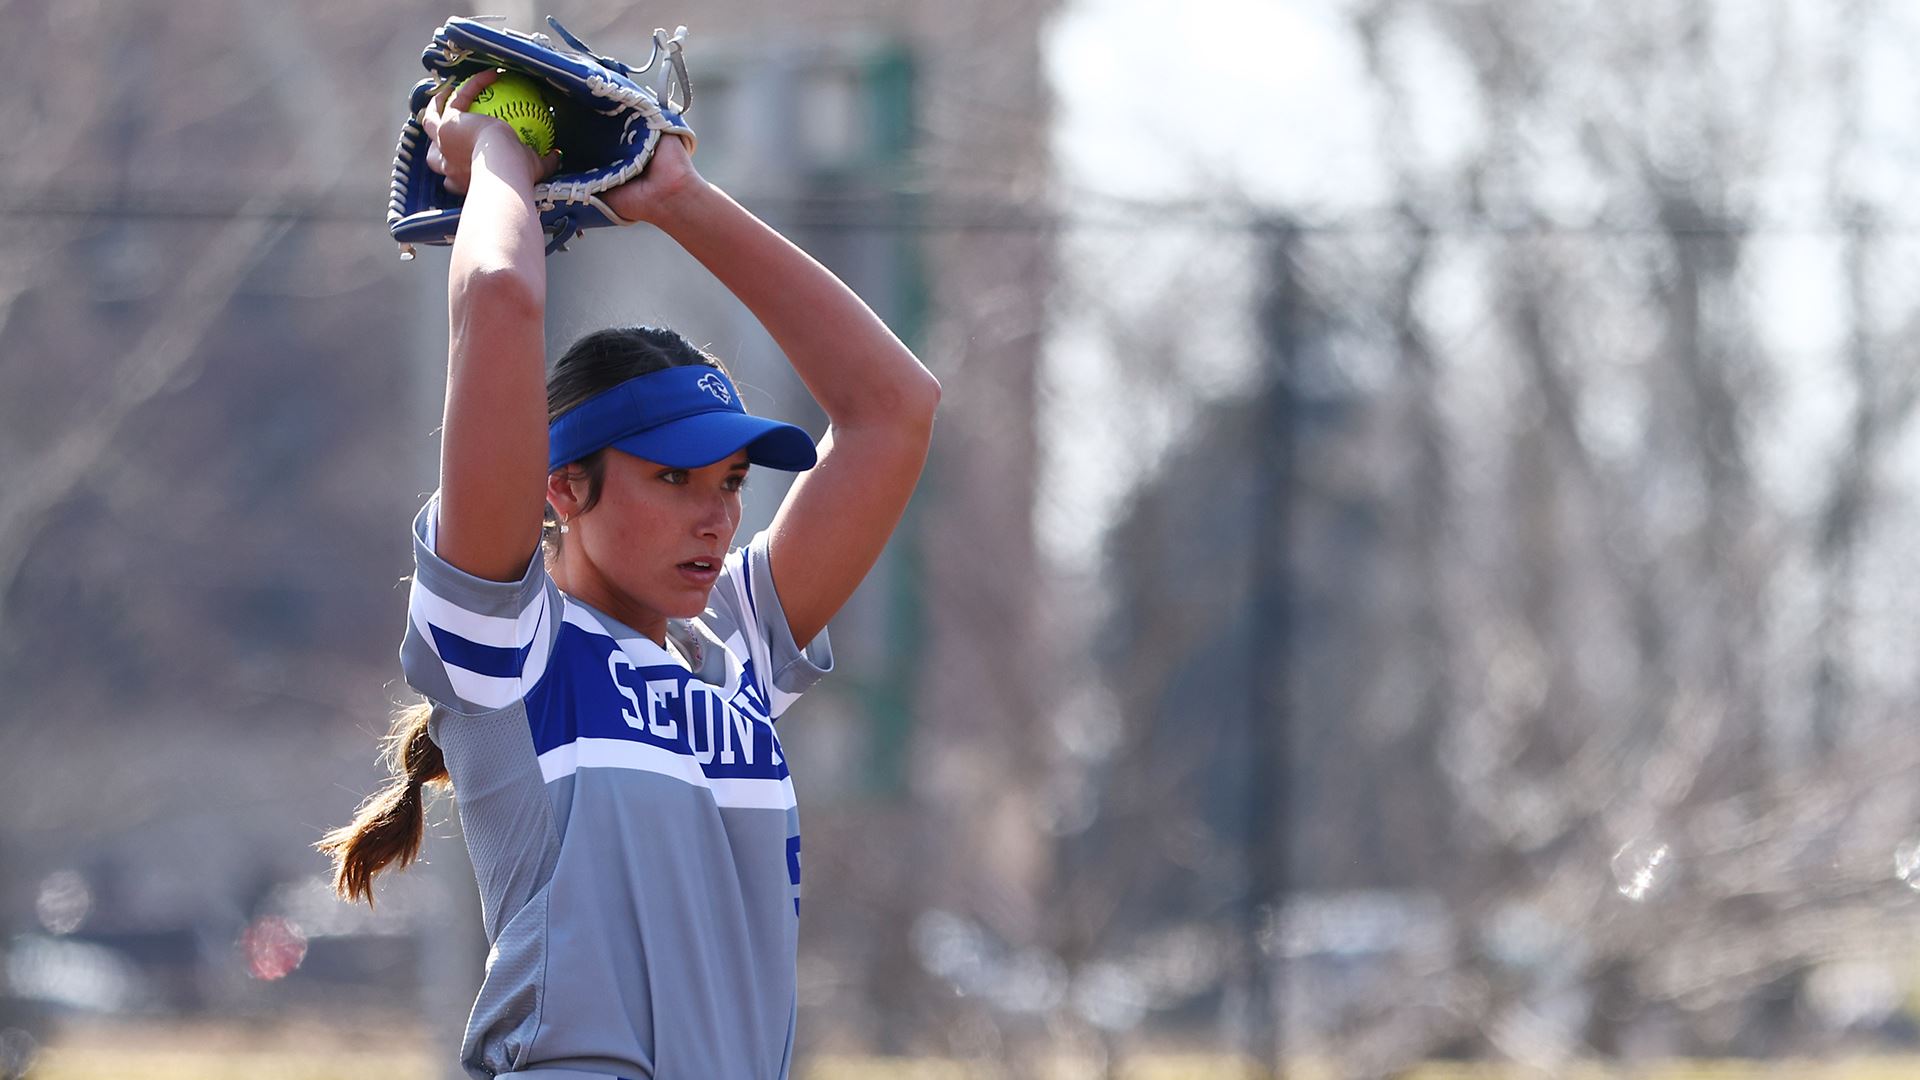 A Seton Hall softball pitcher looks to pitch during a game.